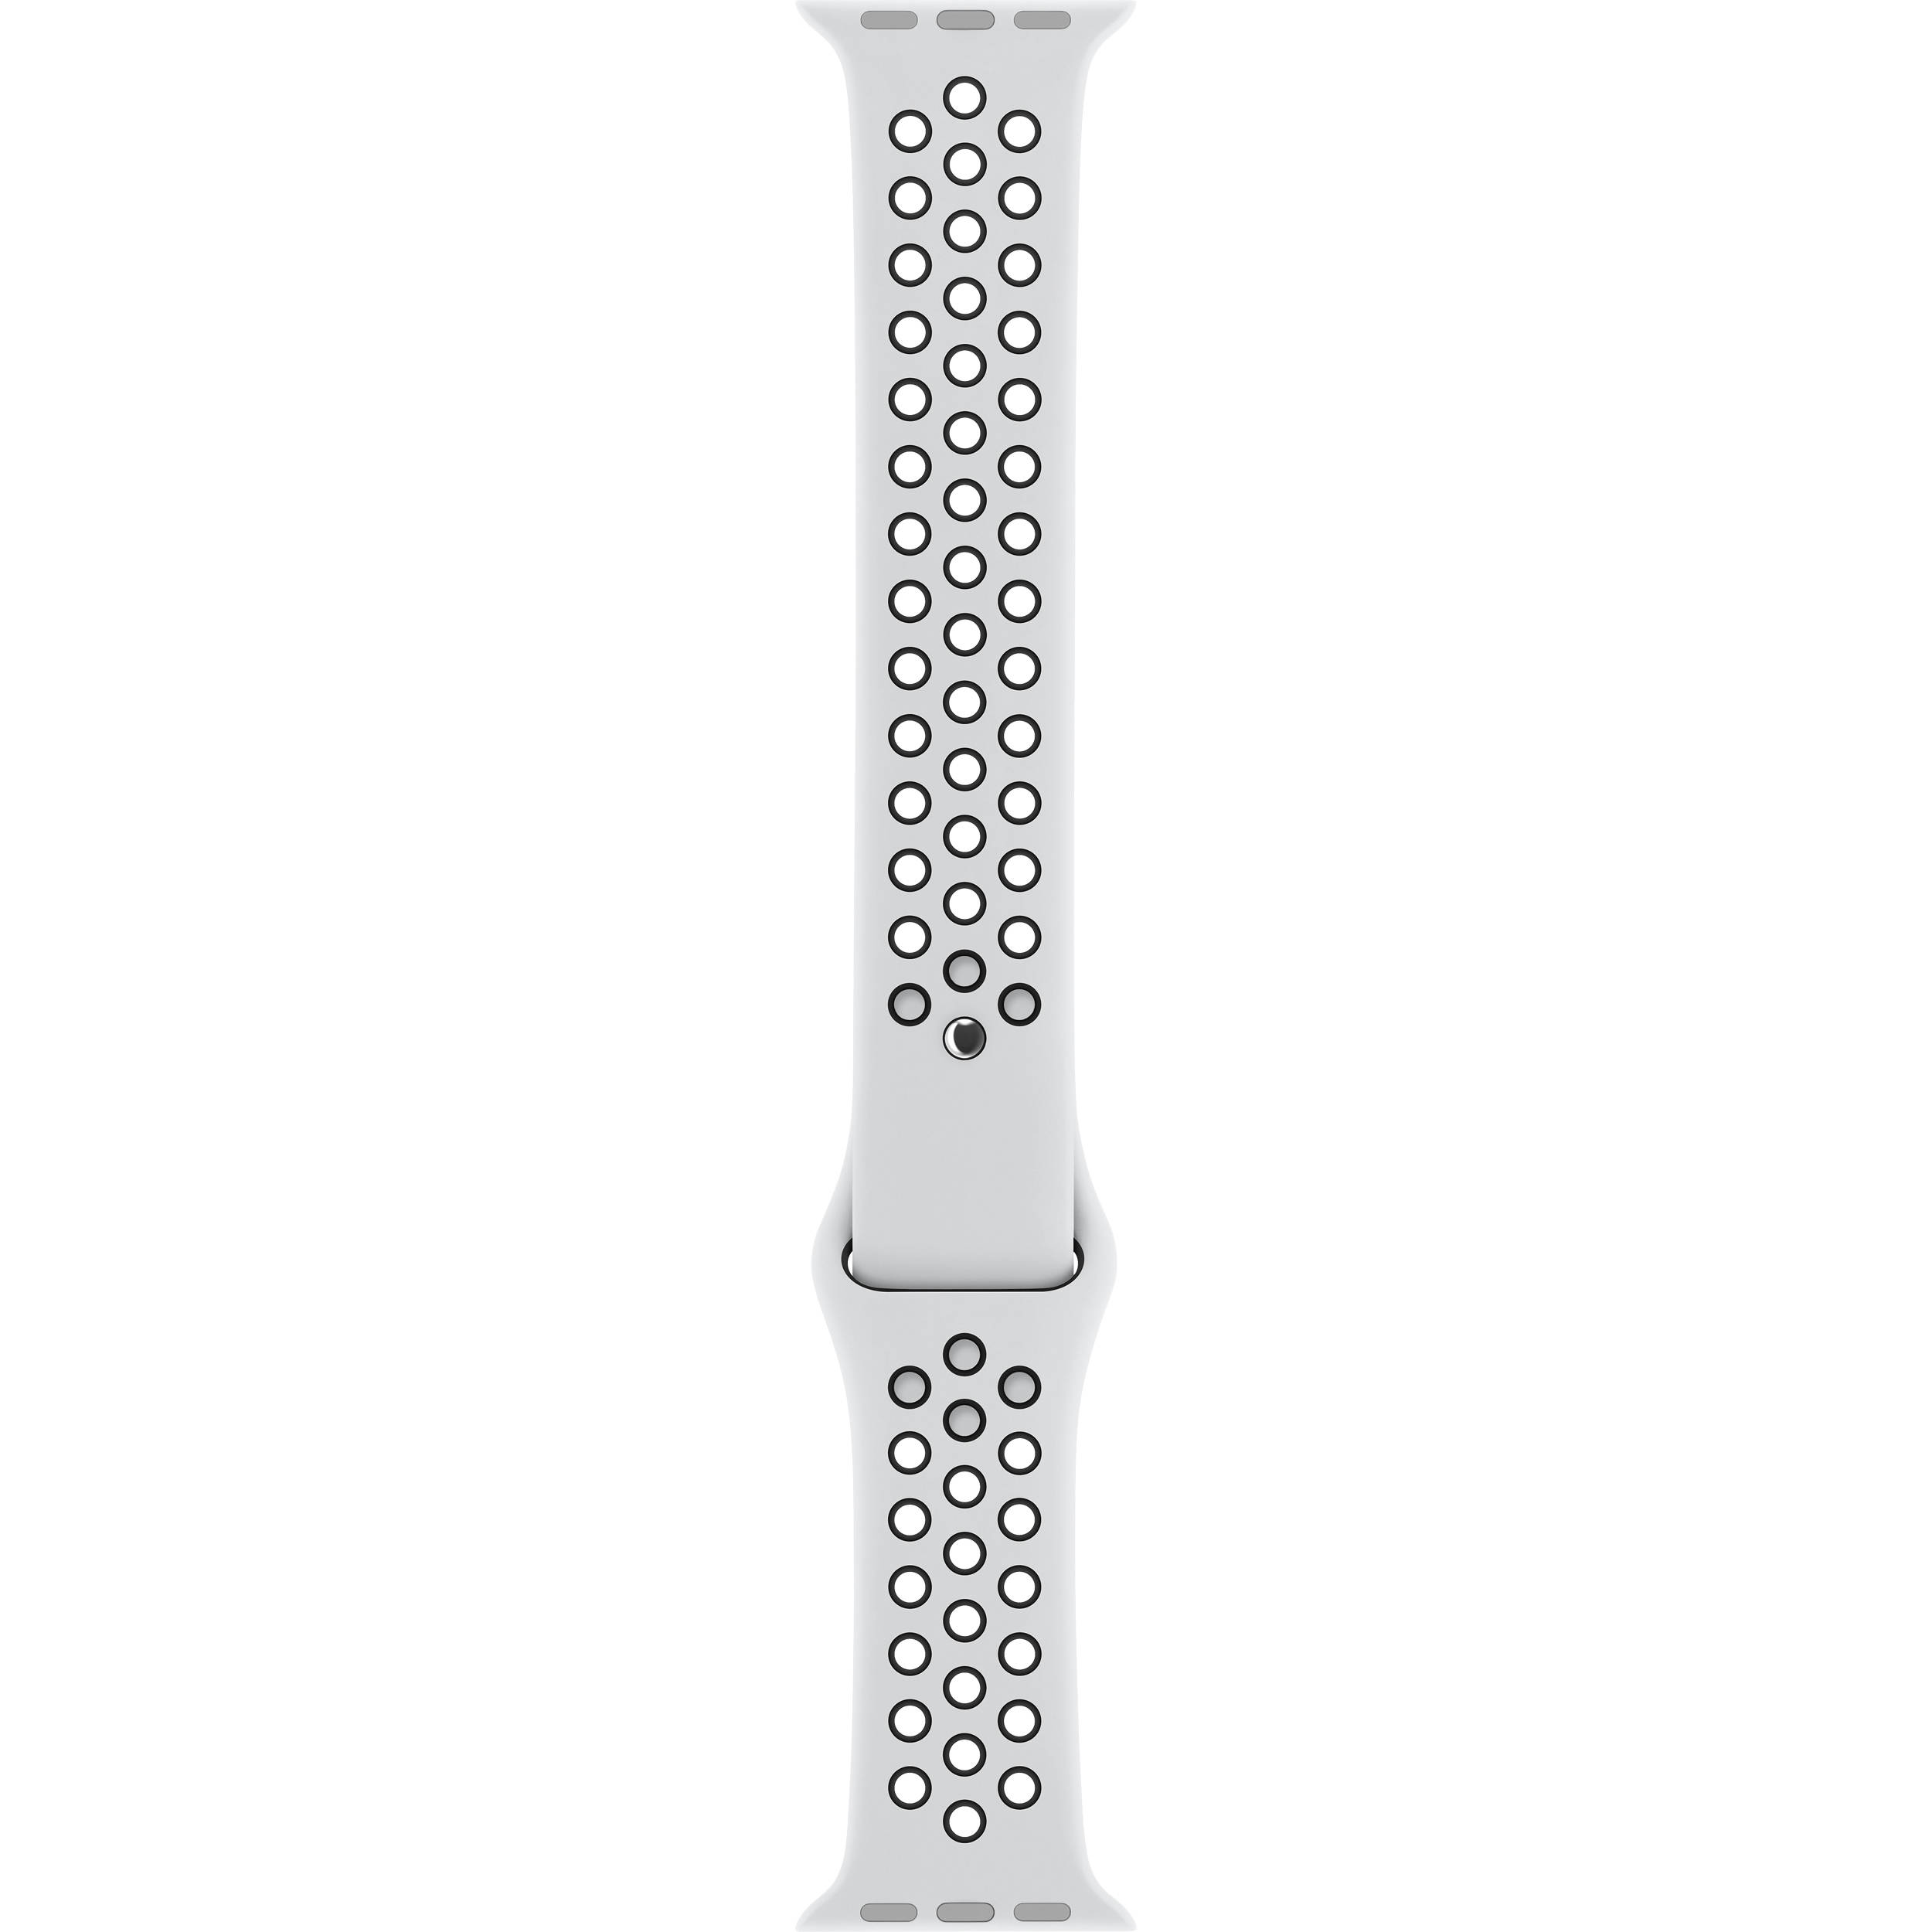 nike sport band for apple watch 42mm